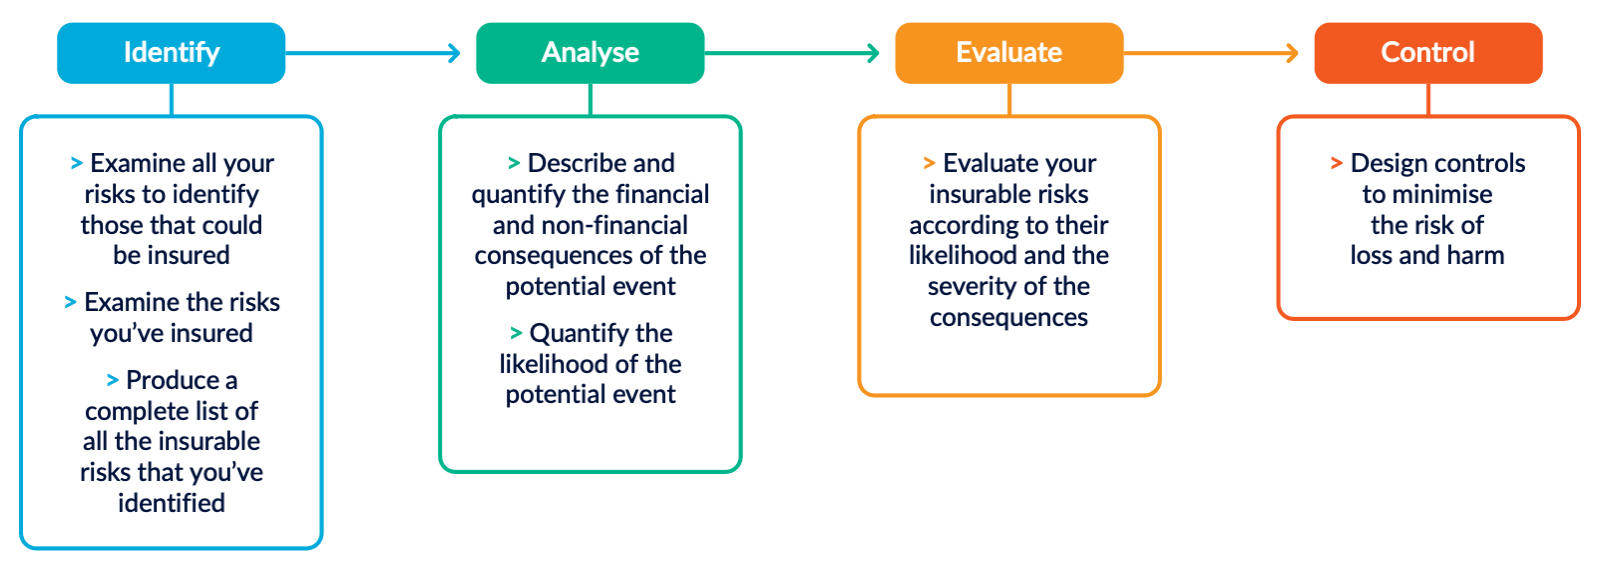 An image showing the standard process of risk assessment. Identify, analyse, evaluate and control.